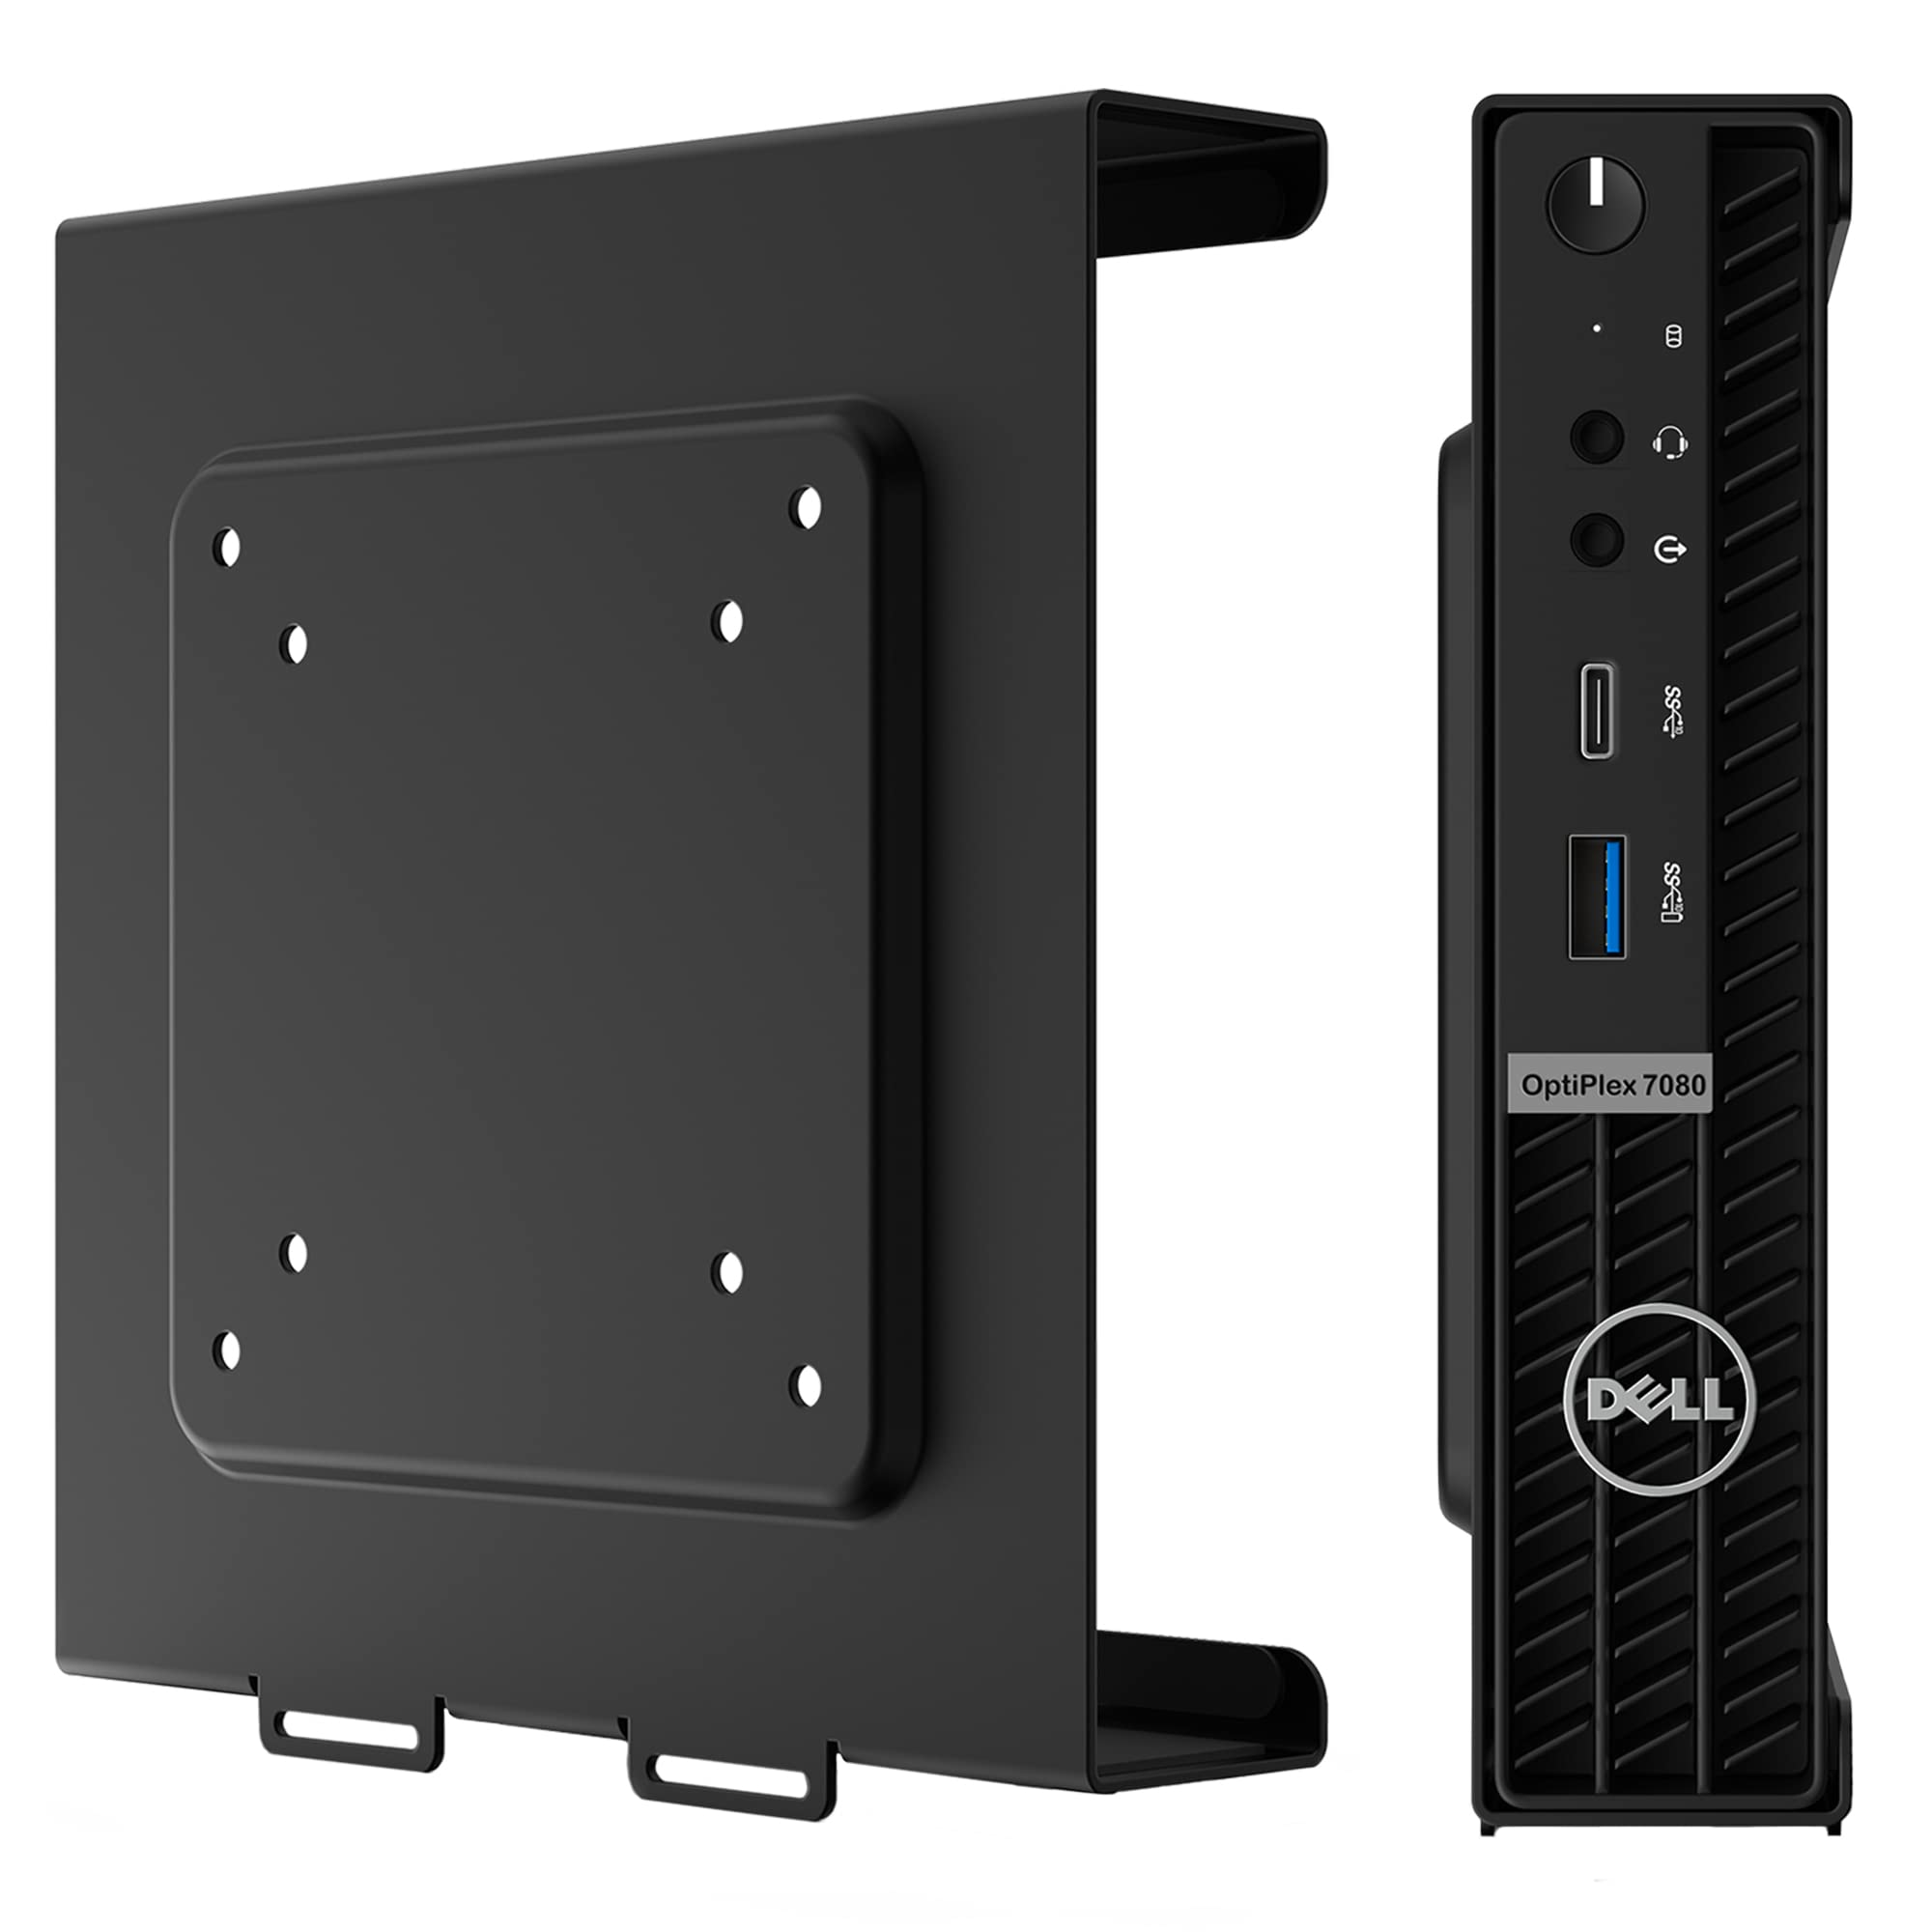 mua-humancentric-mount-compatible-with-dell-optiplex-micro-form-factor